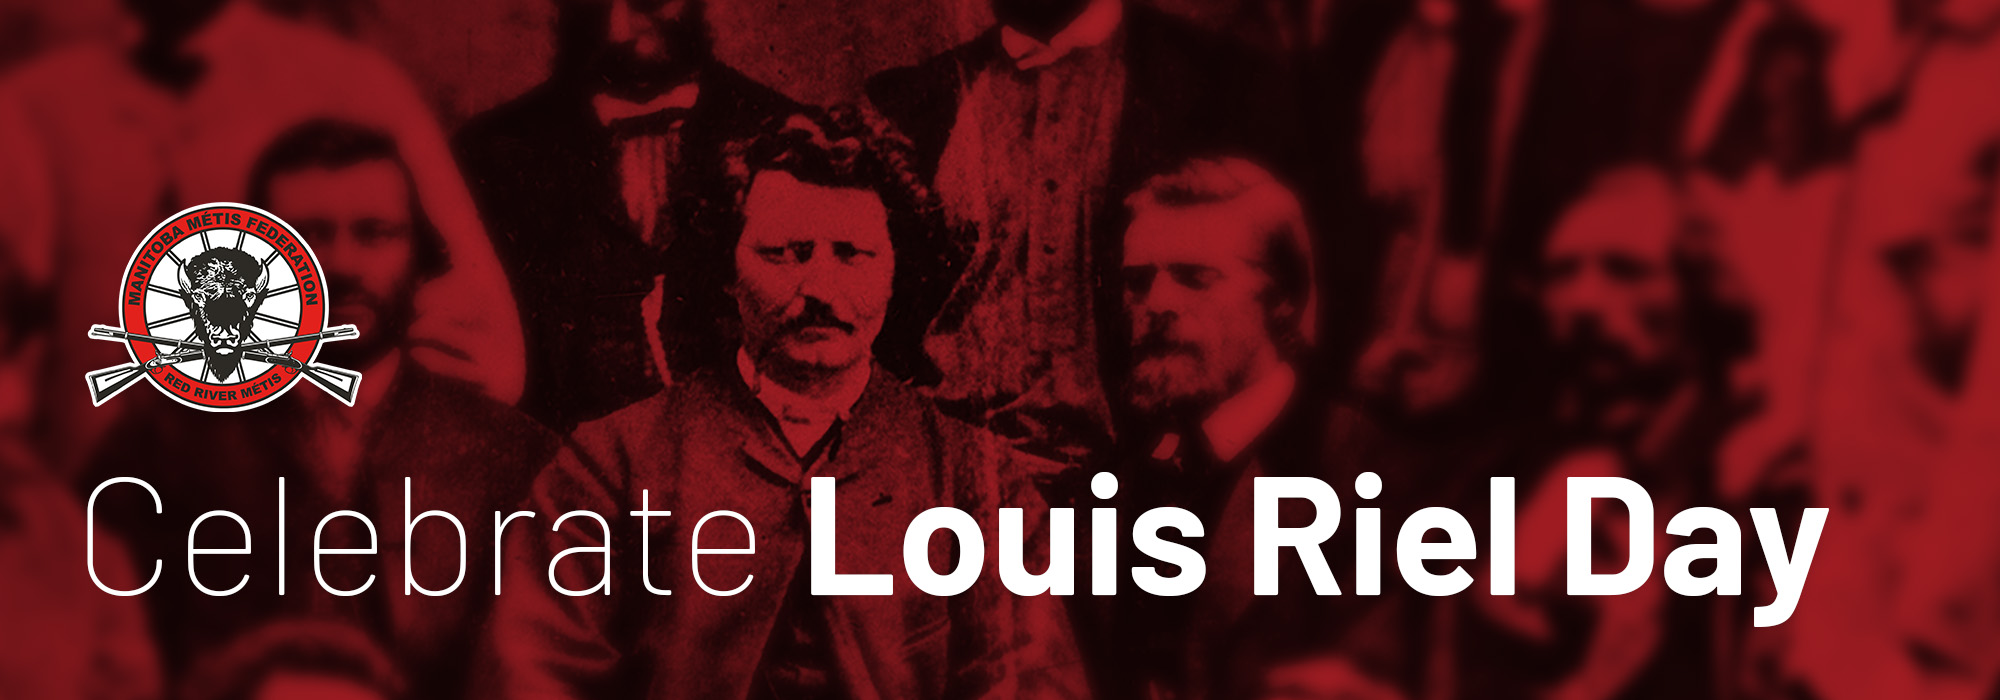 Annual Louis Riel Day Celebrations Fort Dauphin Museum Manitoba